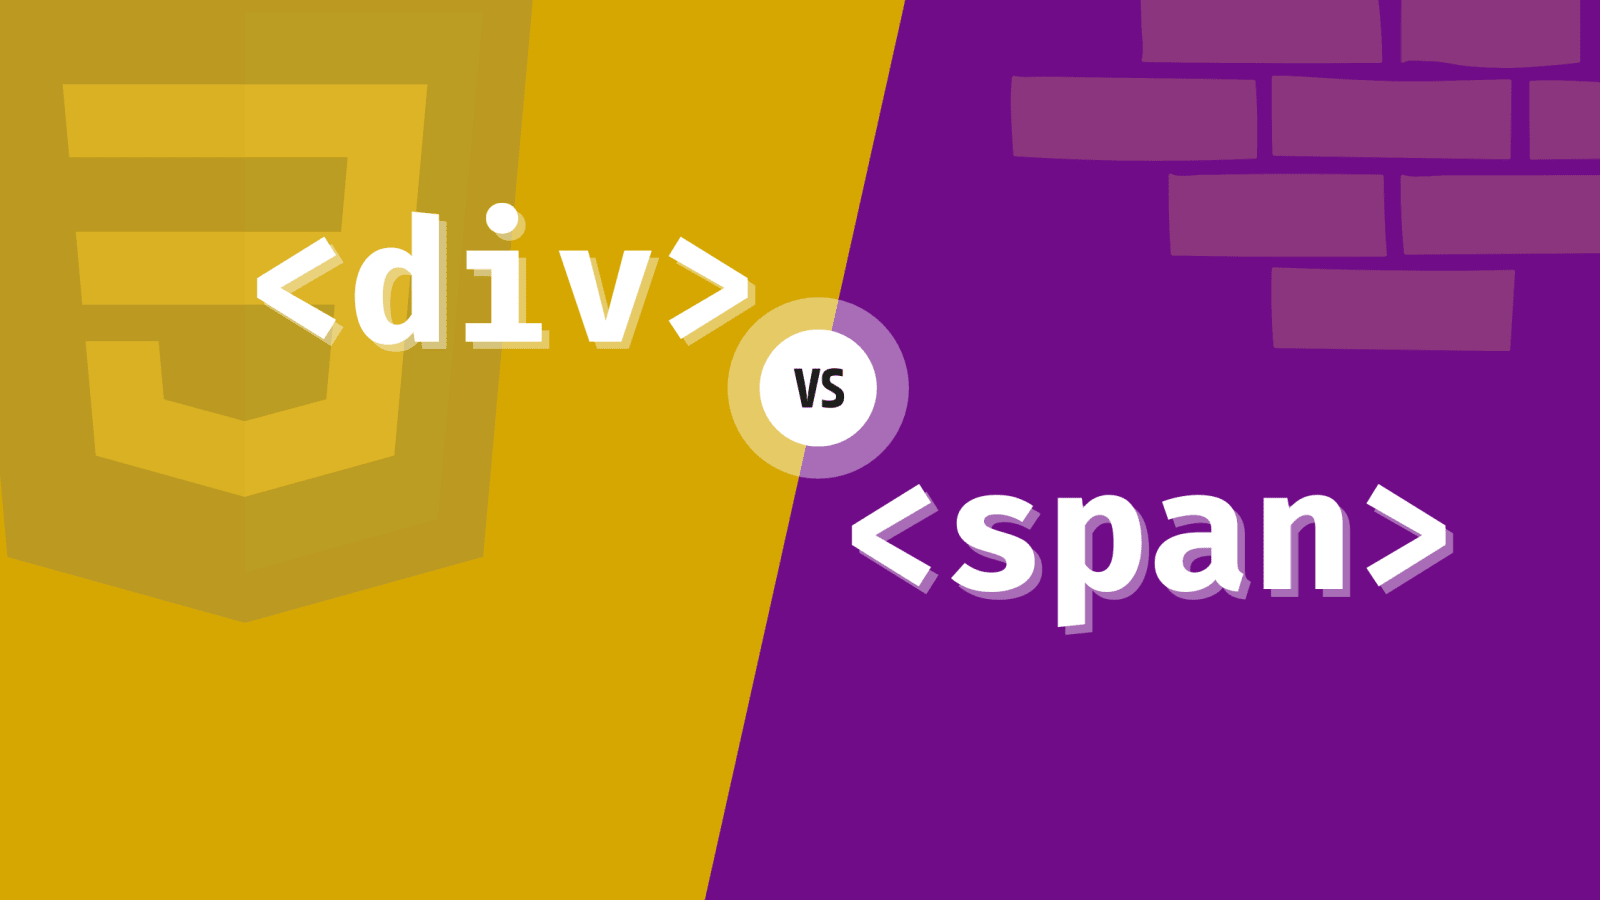 Differences between Div and Span in HTML